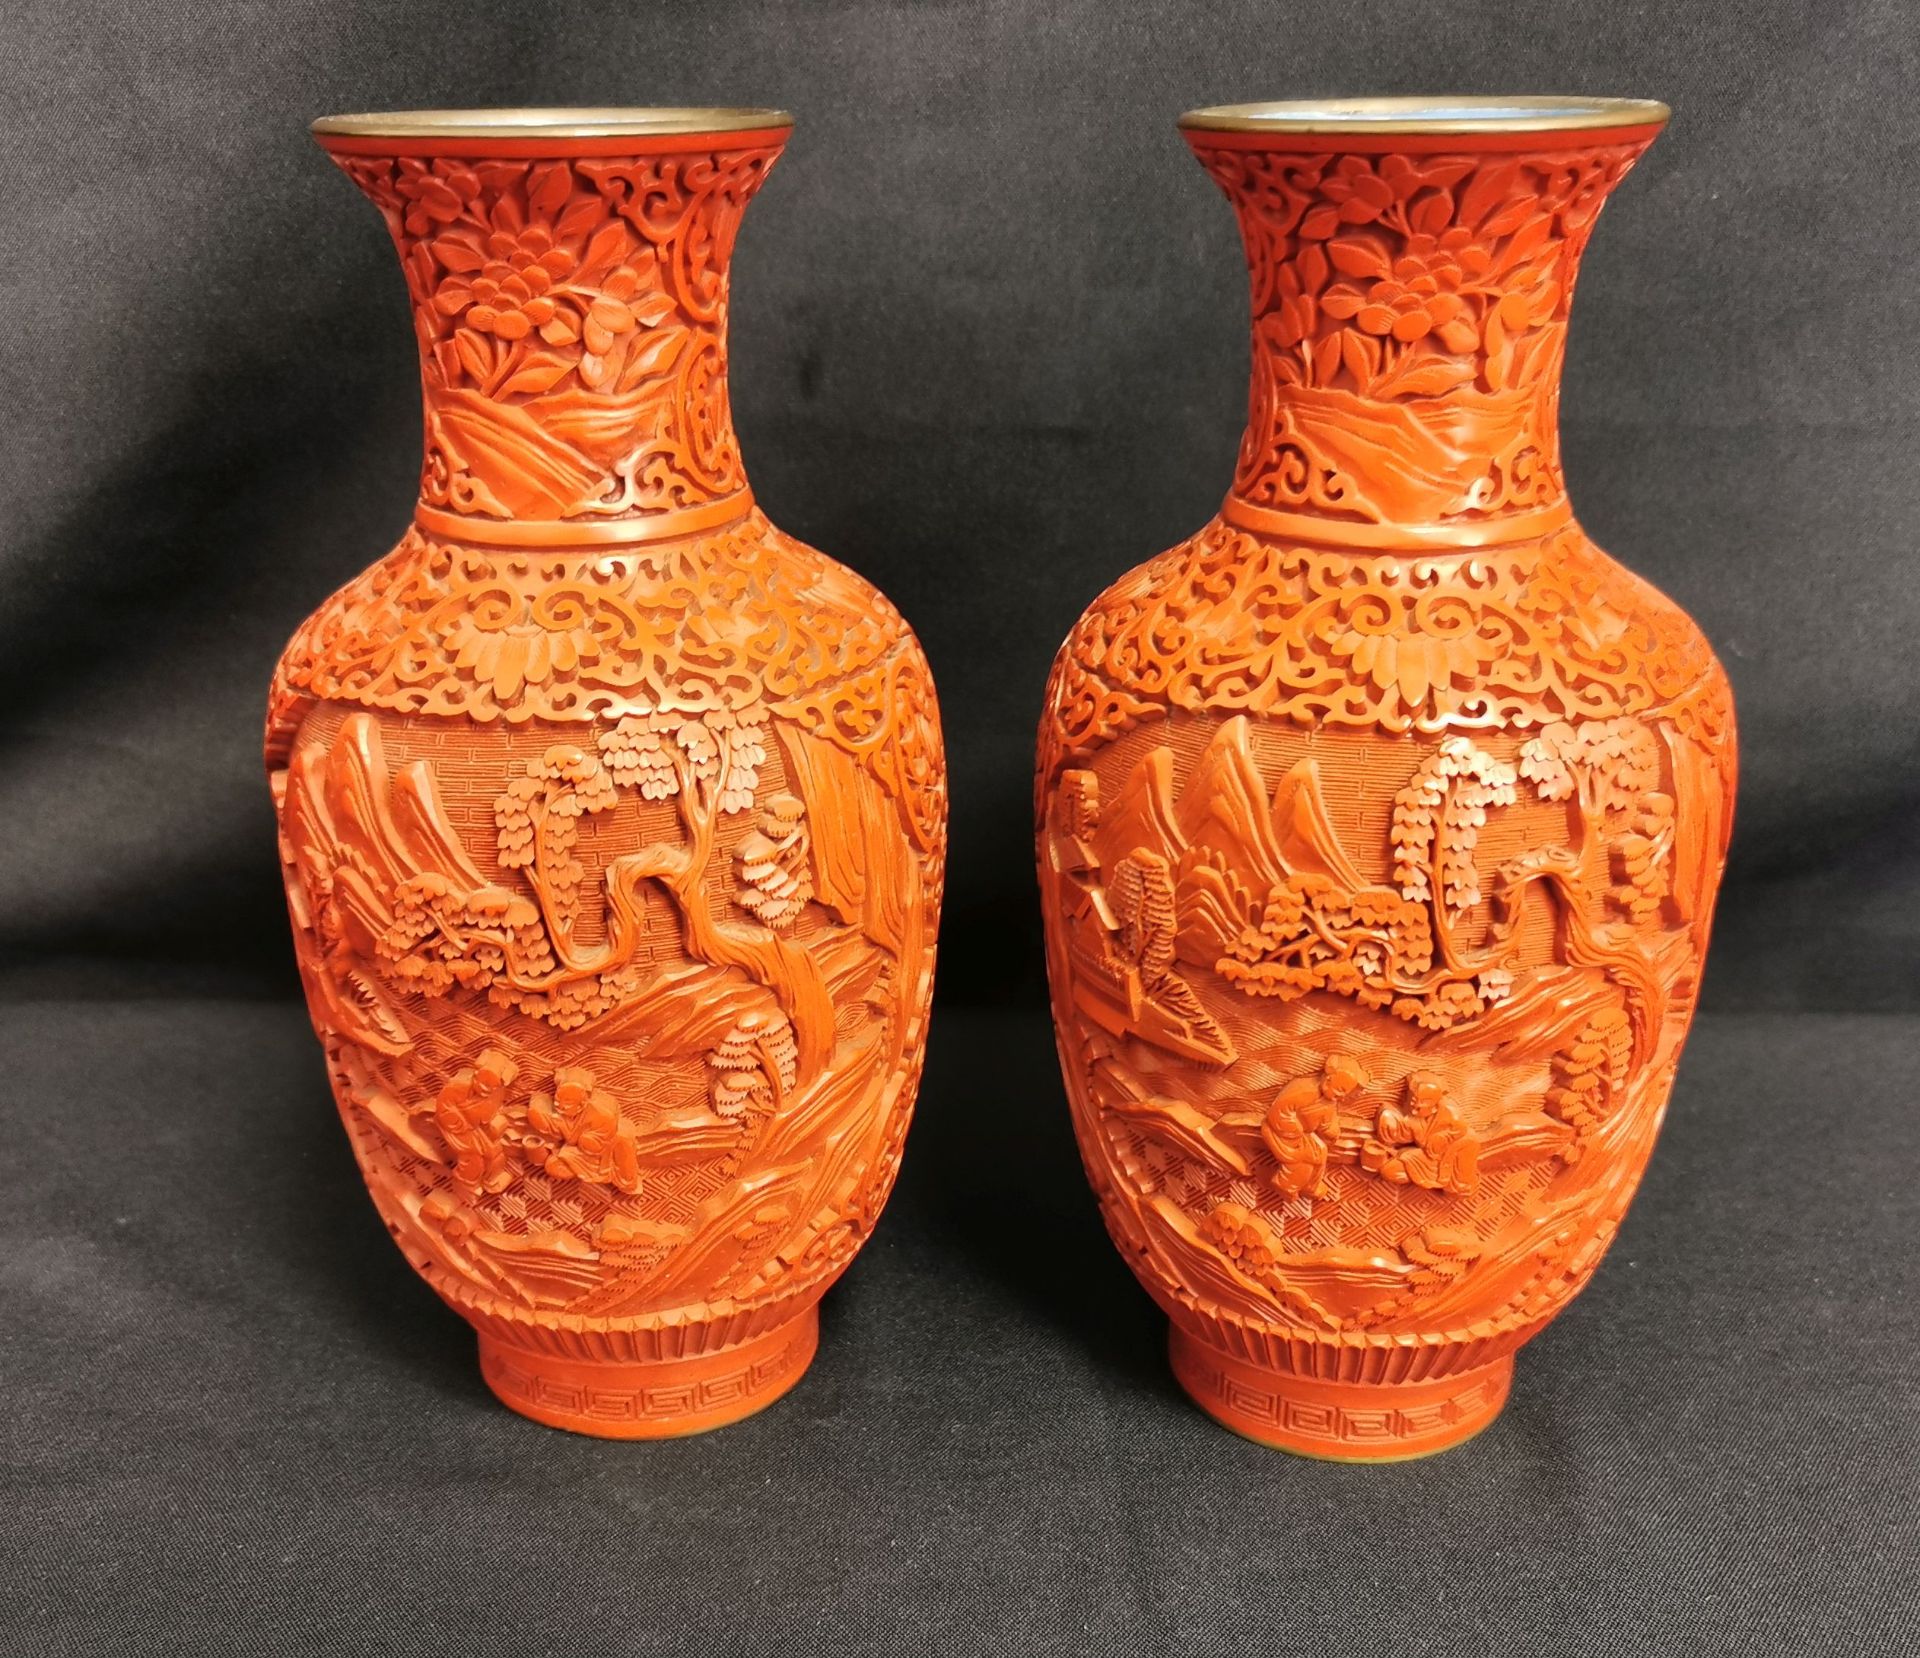 2 CHINESE VASES IN THE APPEARANCE OF RED LACQUER, 20th c. - Image 3 of 6